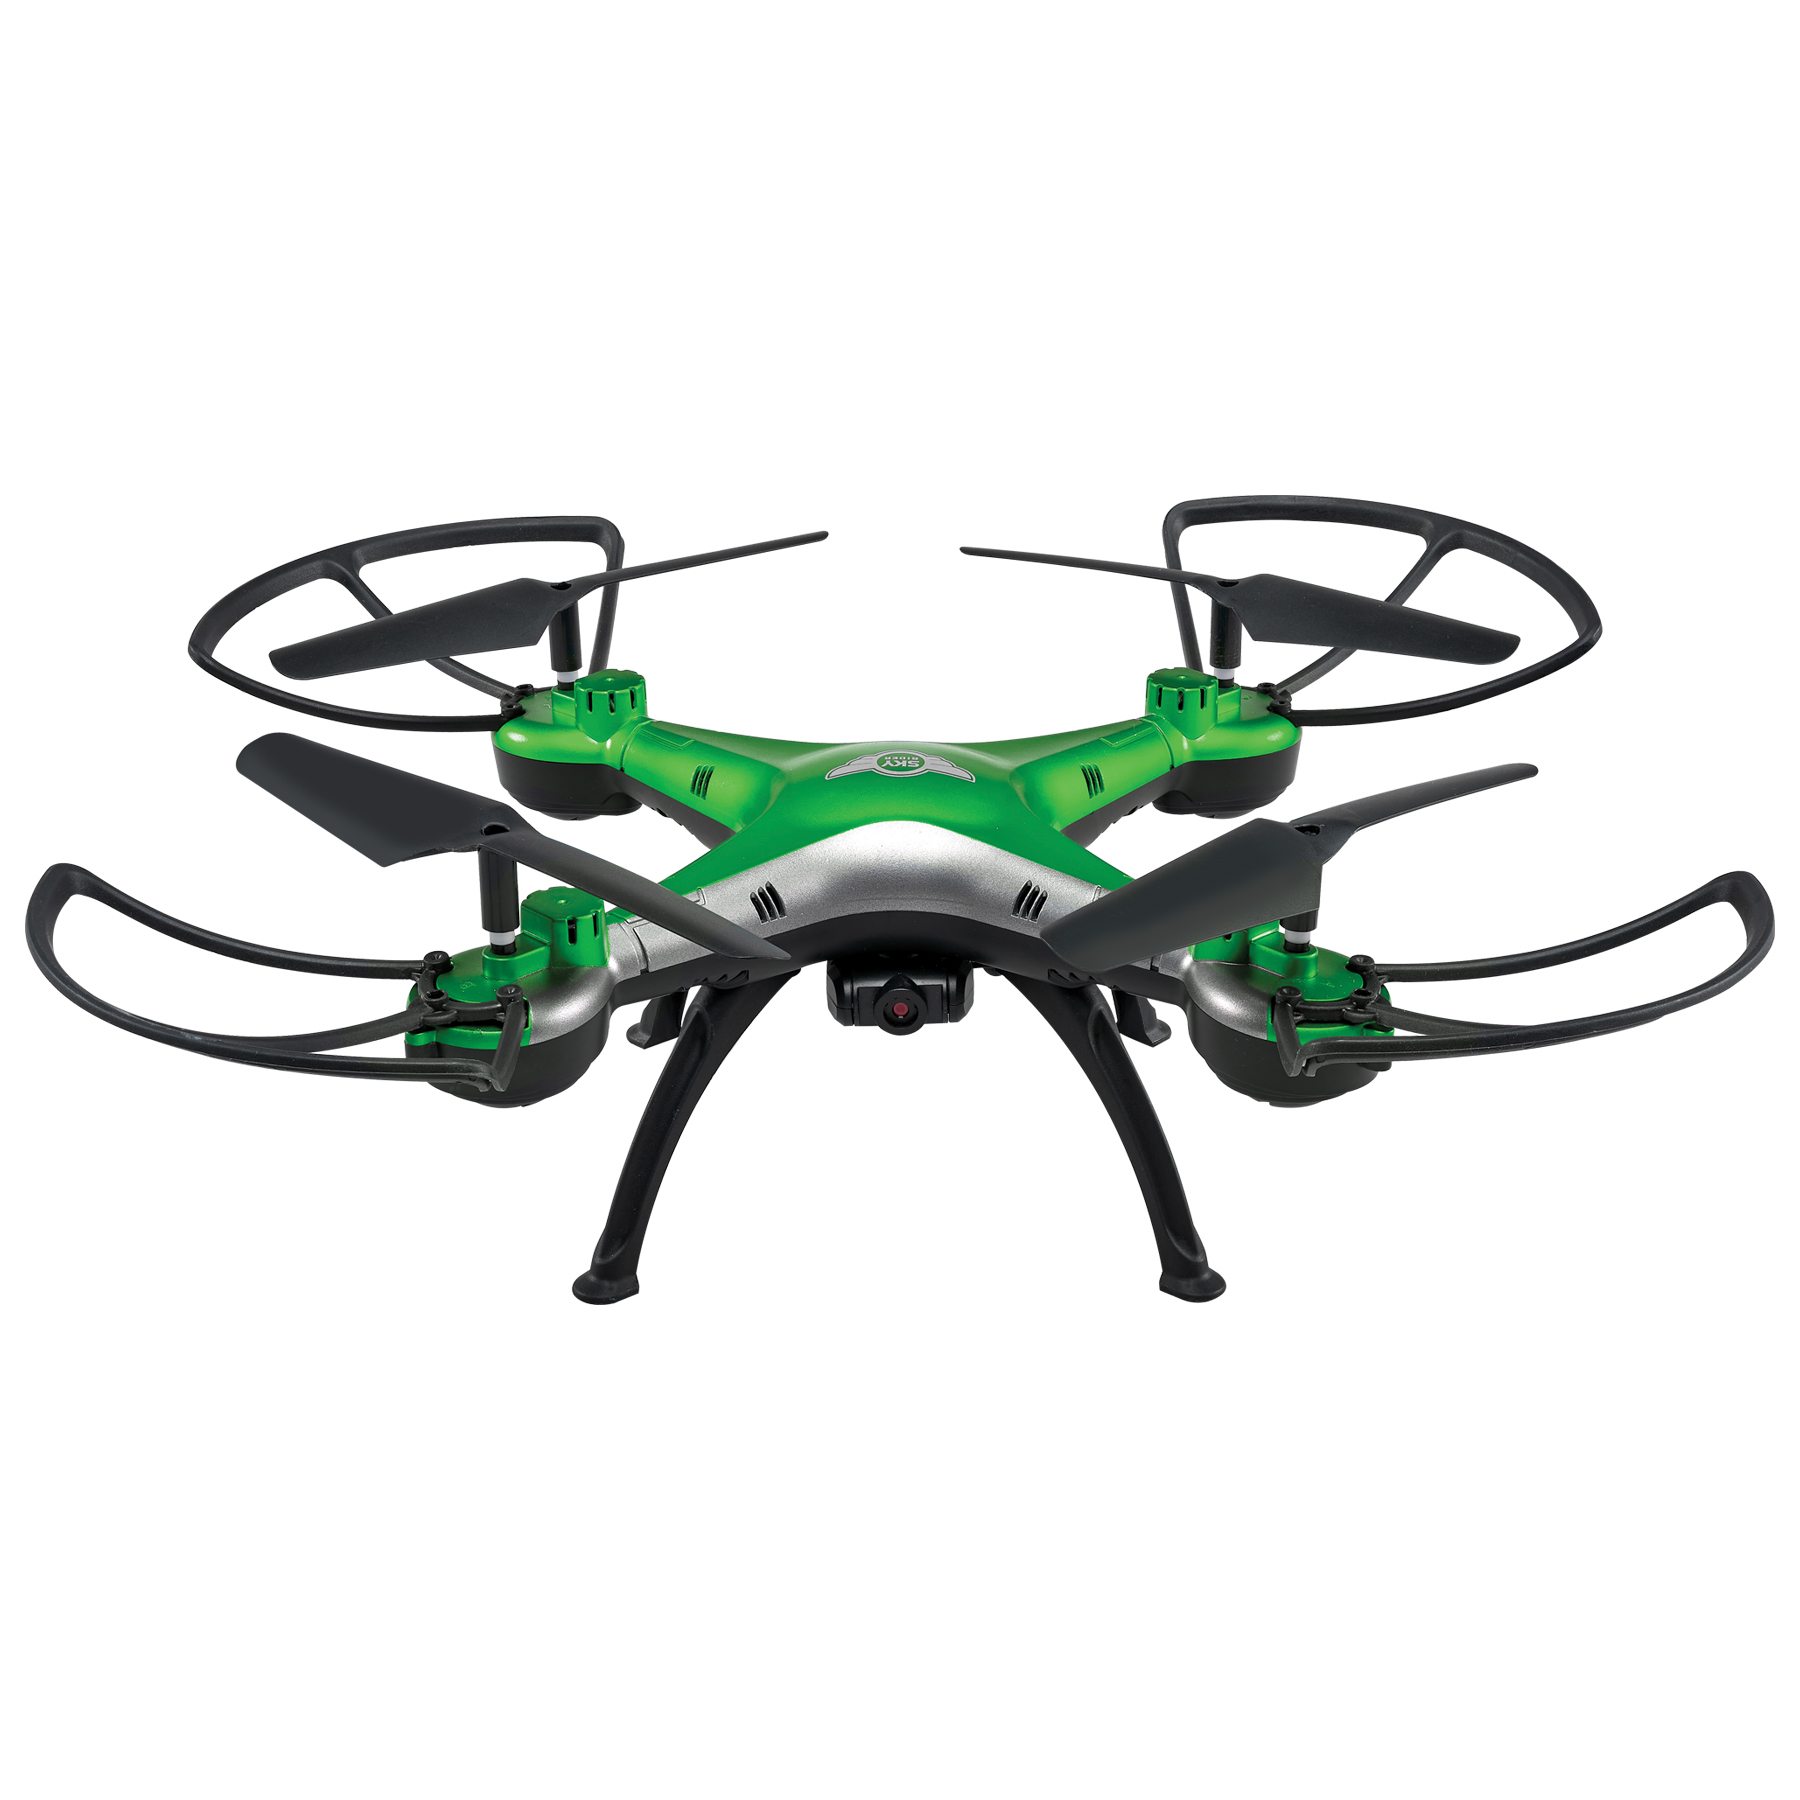 Sky Rider Thunderbird 2 Quadcopter Drone with Wi-Fi Camera, DRW330, Green - image 5 of 5